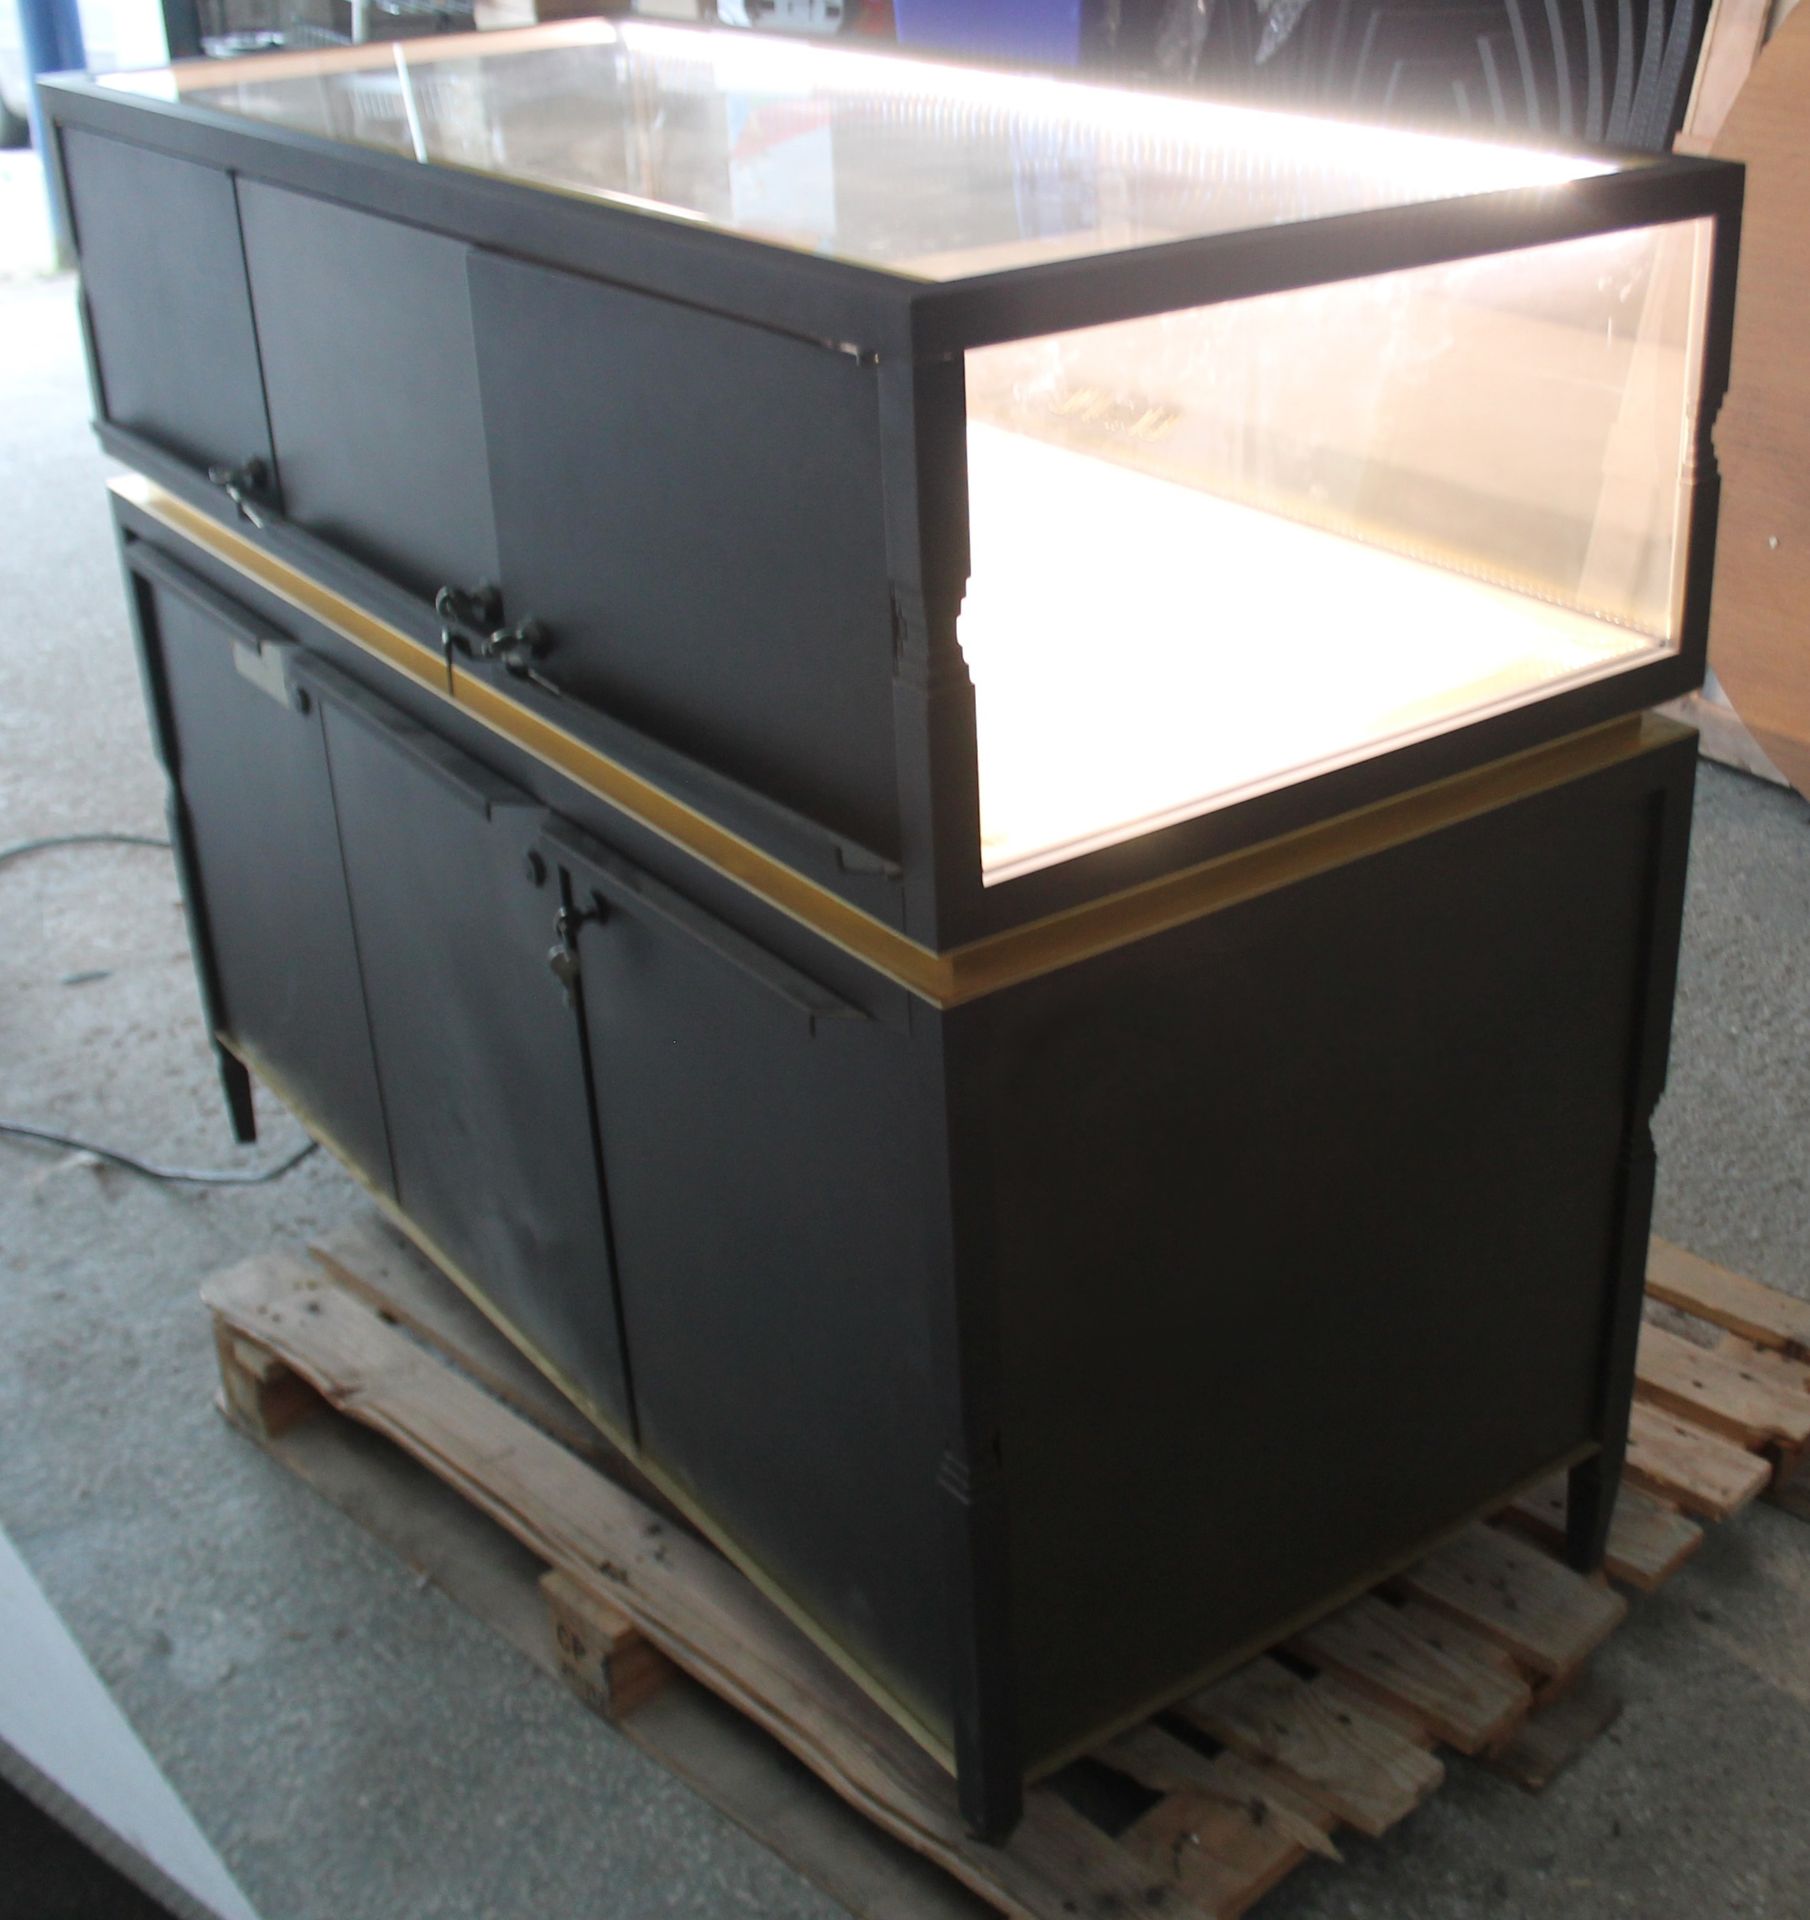 1 x Commercial 3-Door Retail Counter / Illuminated Display Case With A Gun Metal Finish - Ex-Display - Image 3 of 18